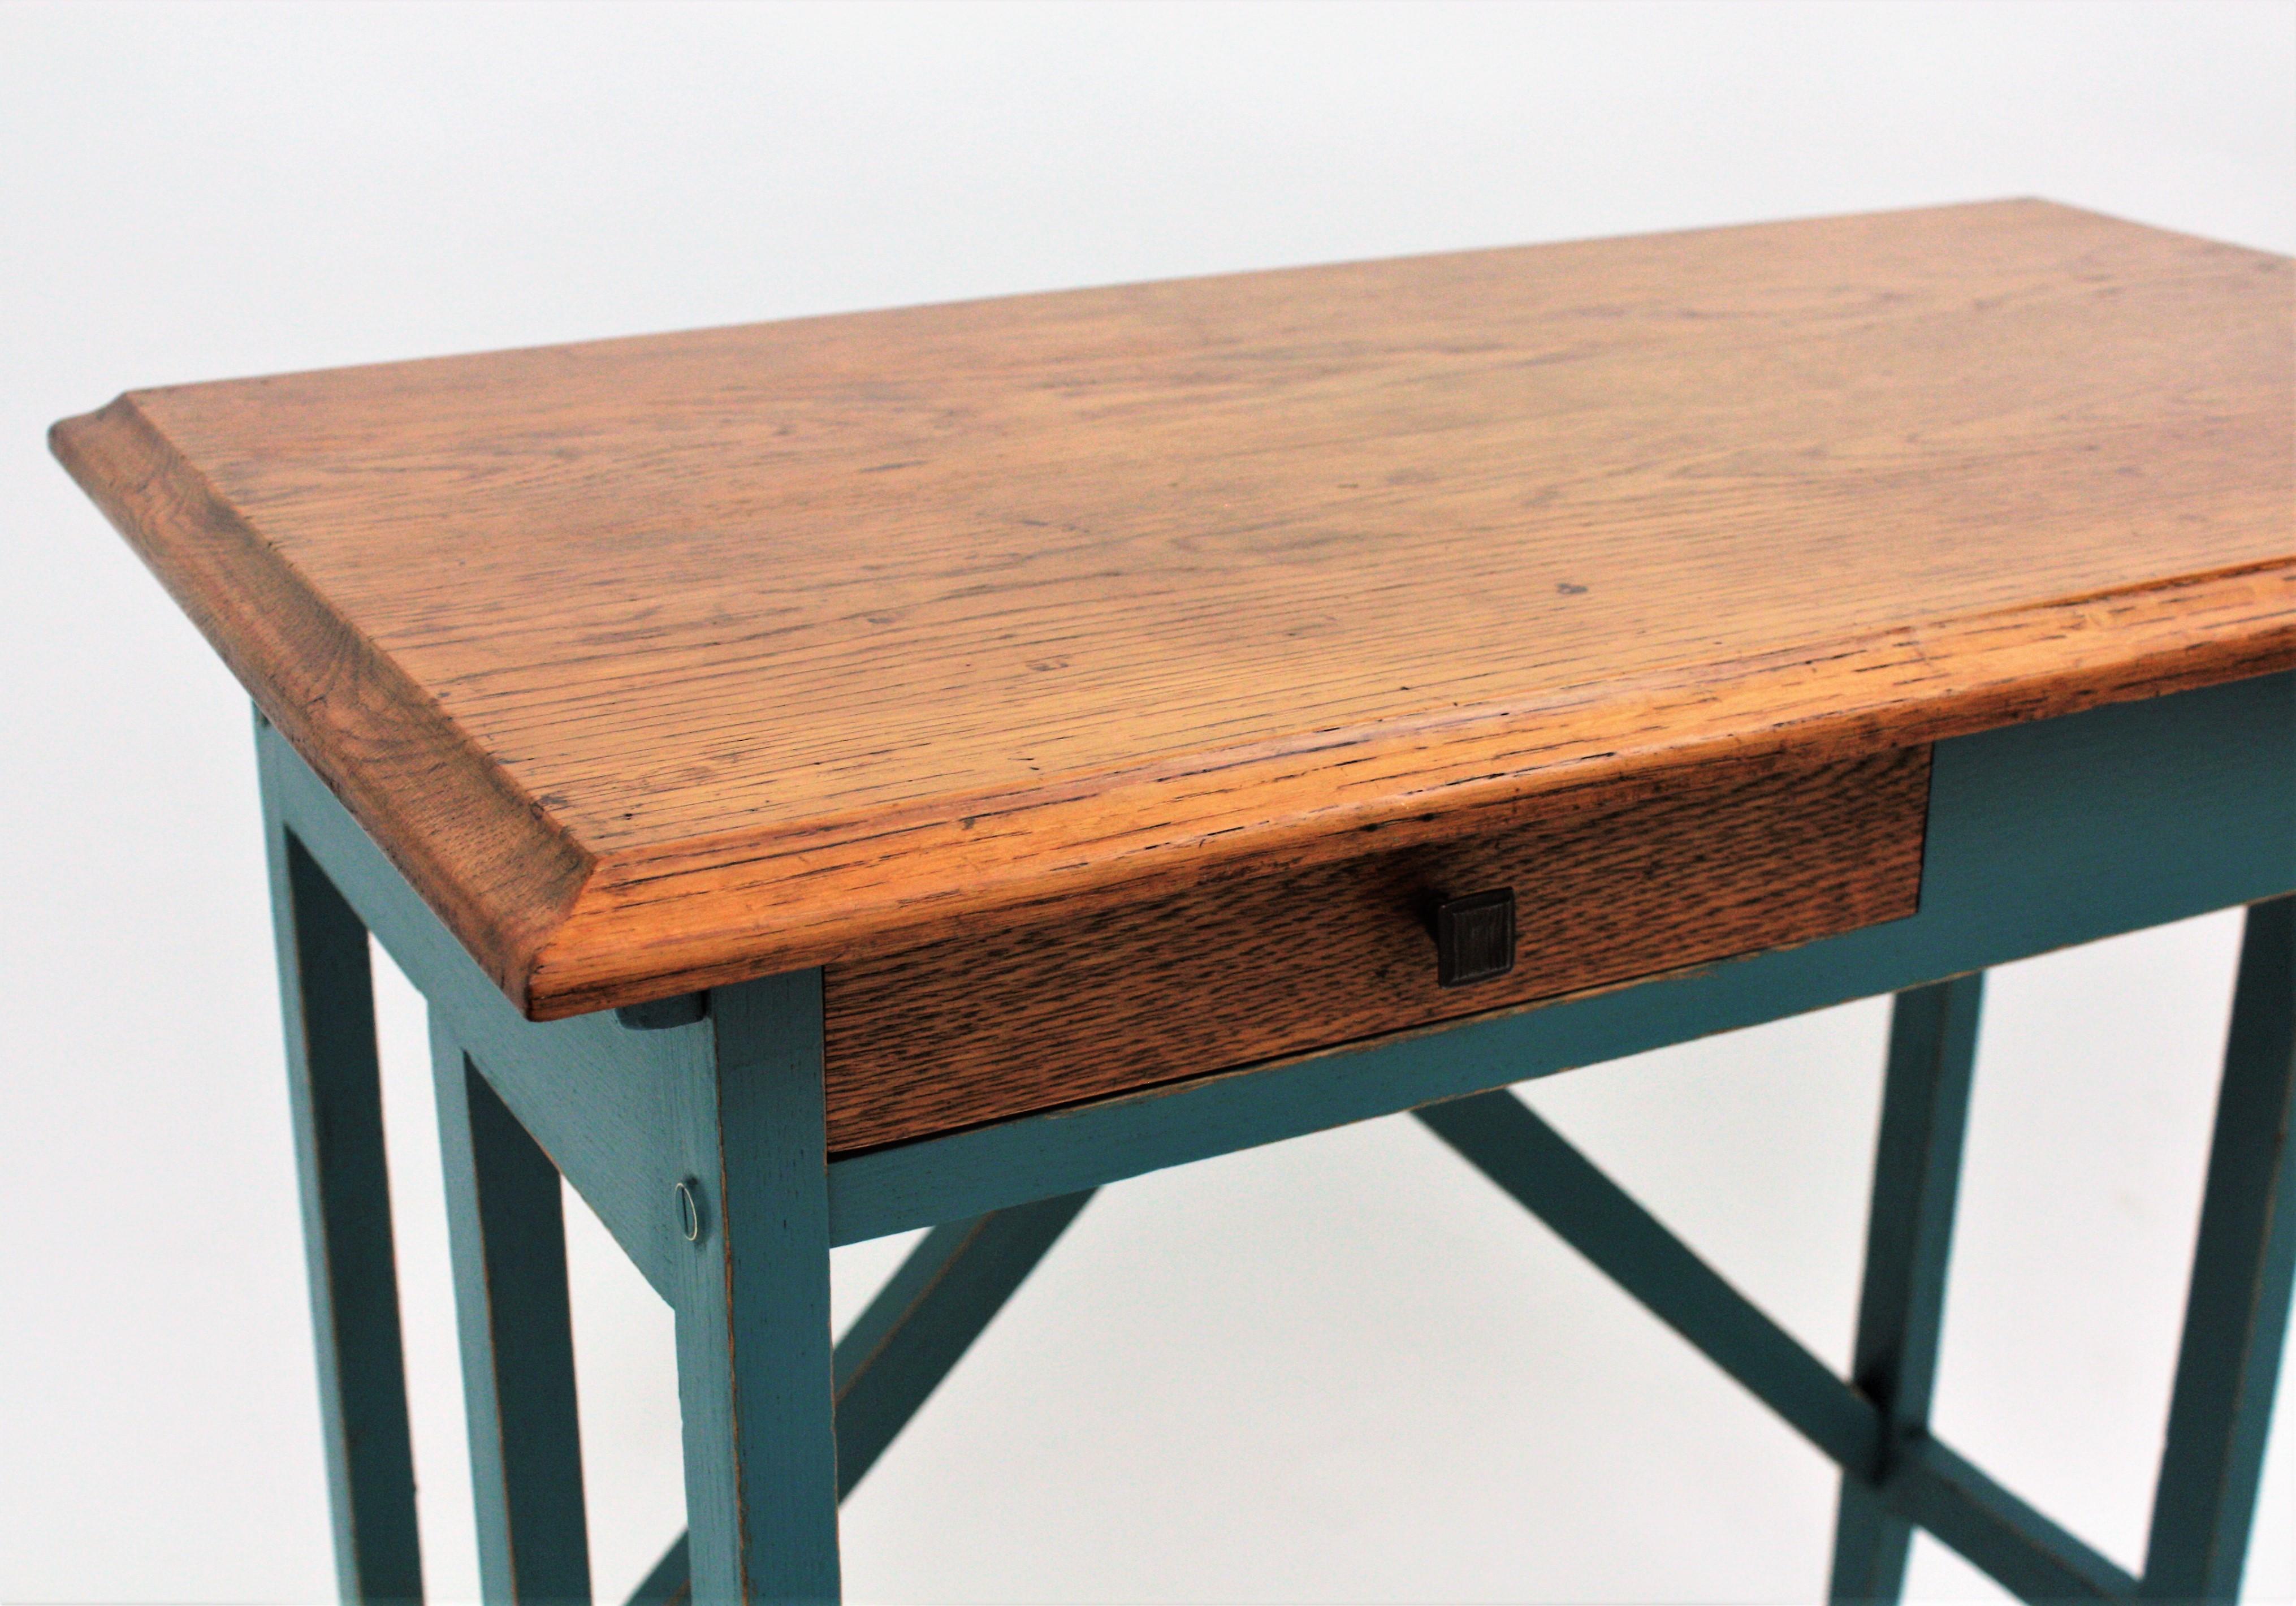 Spanish Desk and Stool in Oak with Green Blue Patina, 1930s For Sale 2